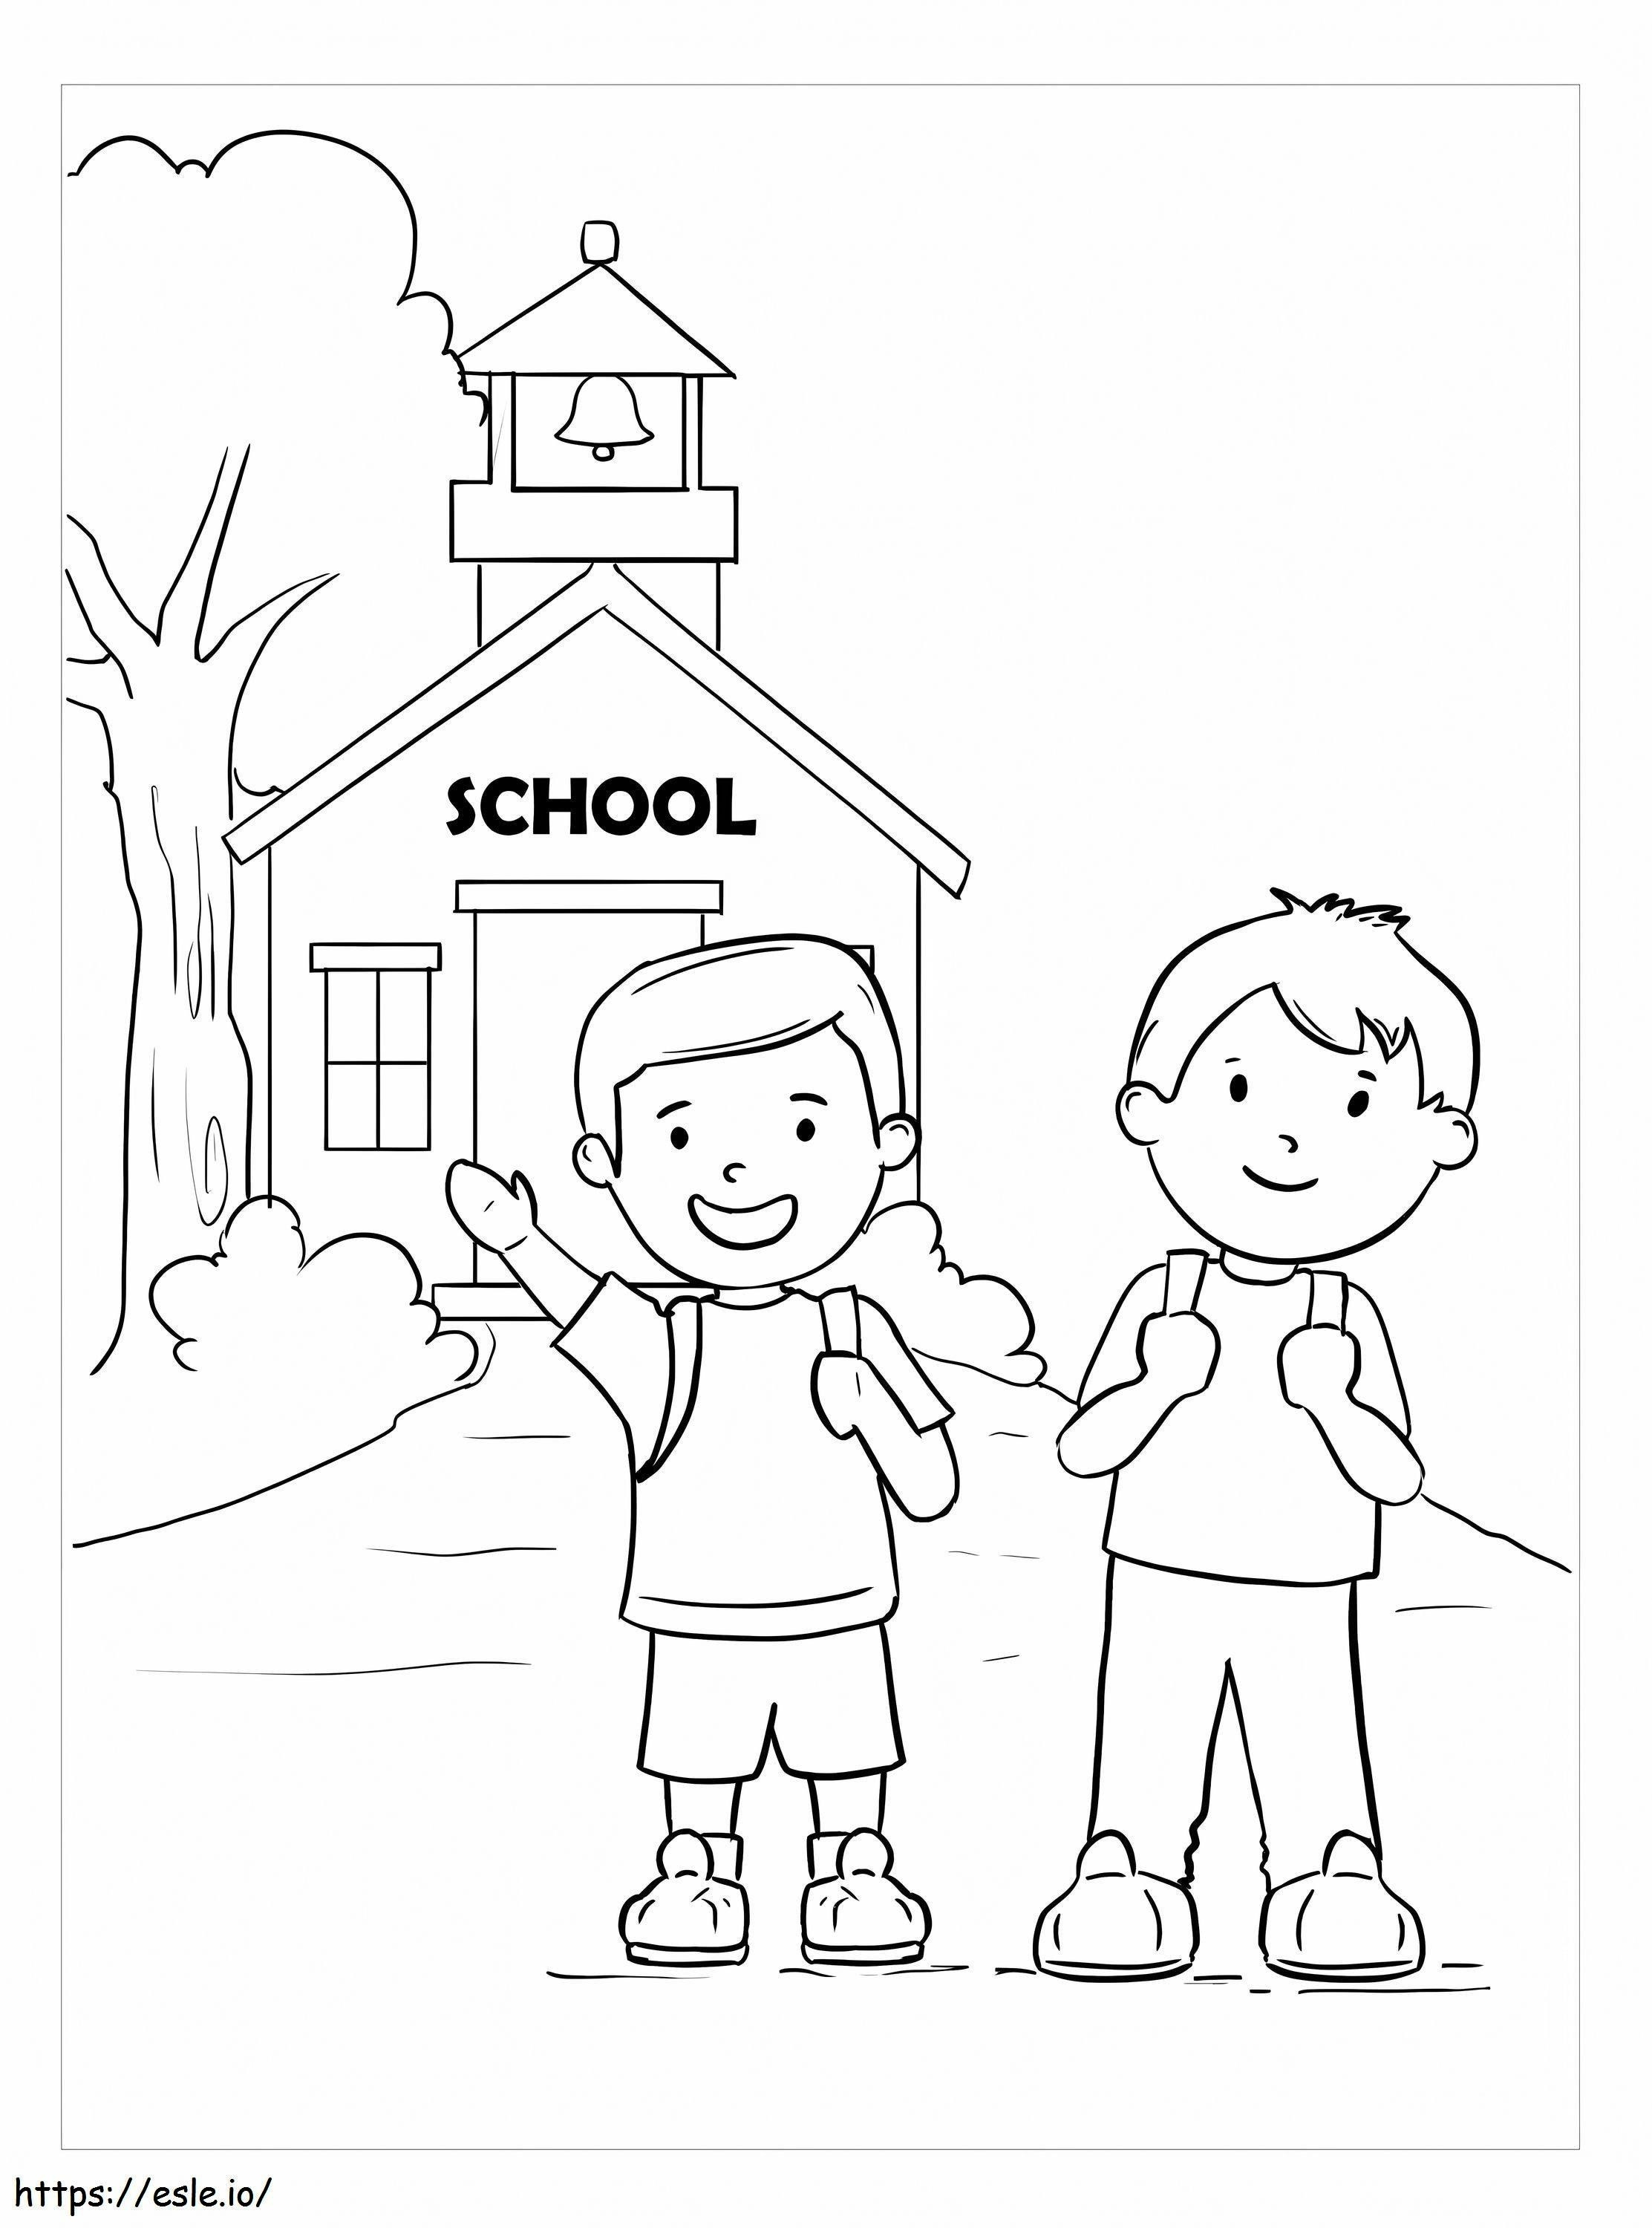 Two Boys Go To School coloring page